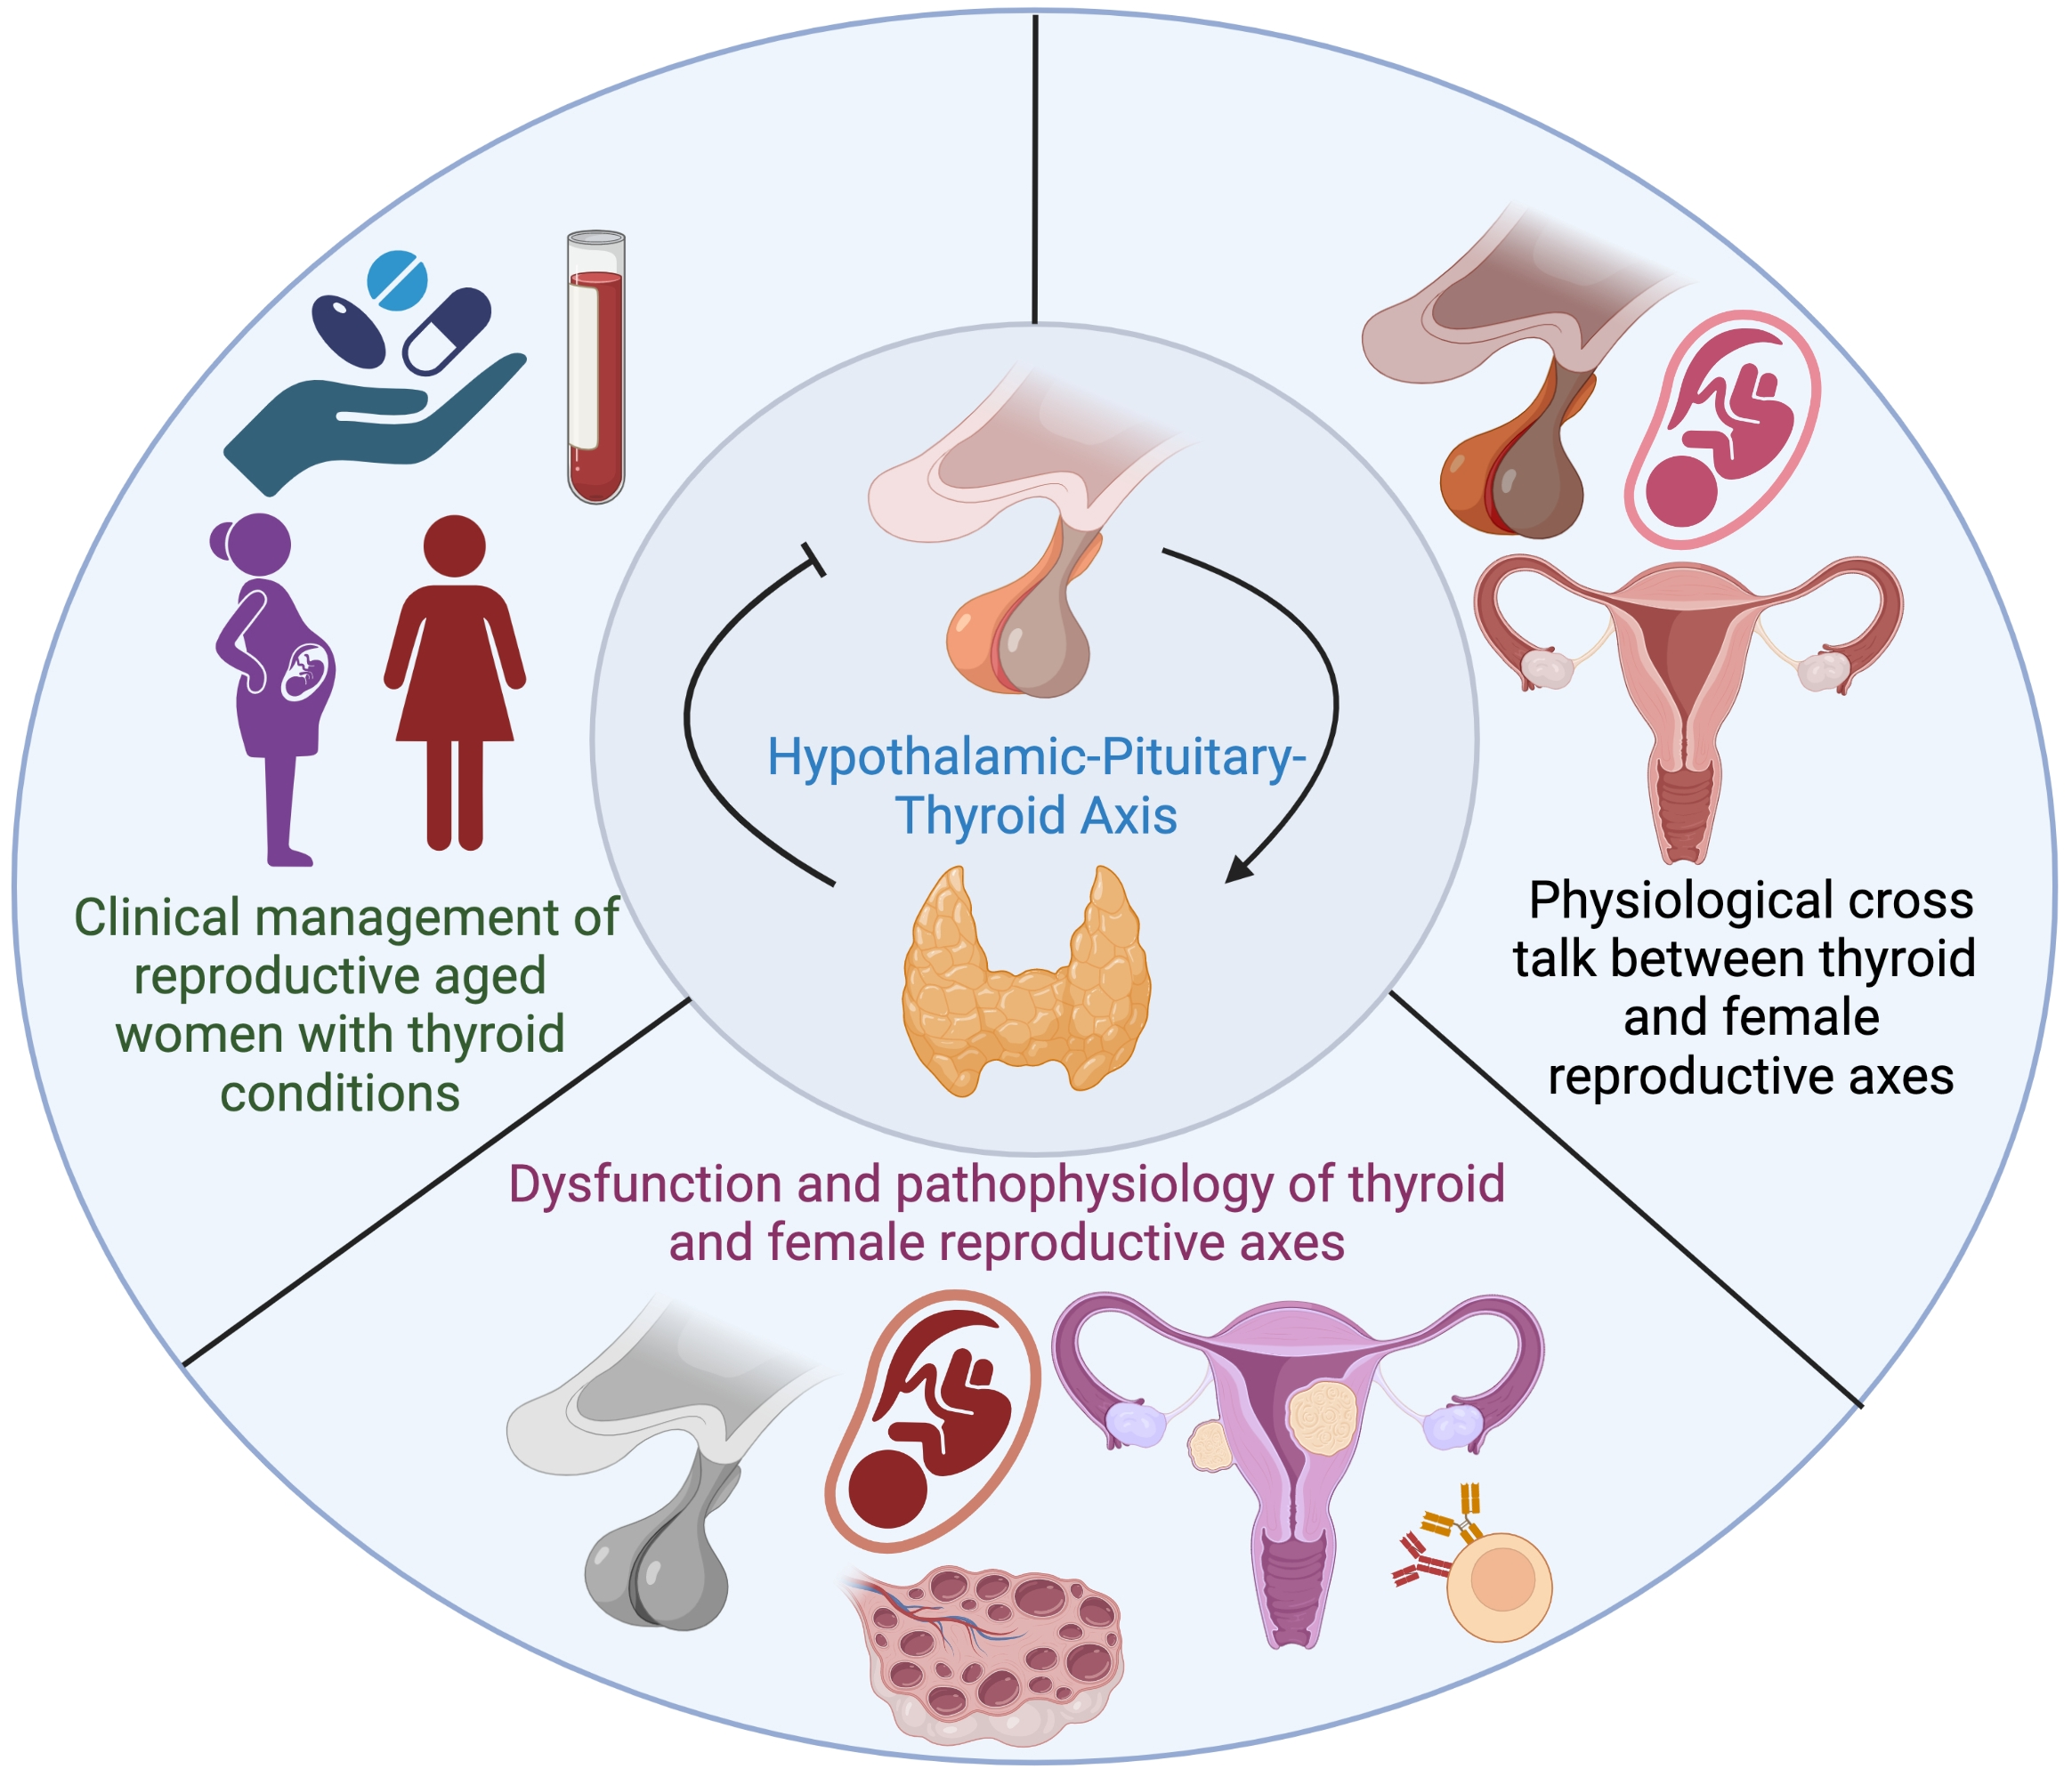 Ijms Free Full Text The Thyroid Hormone Axis And Female Reproduction